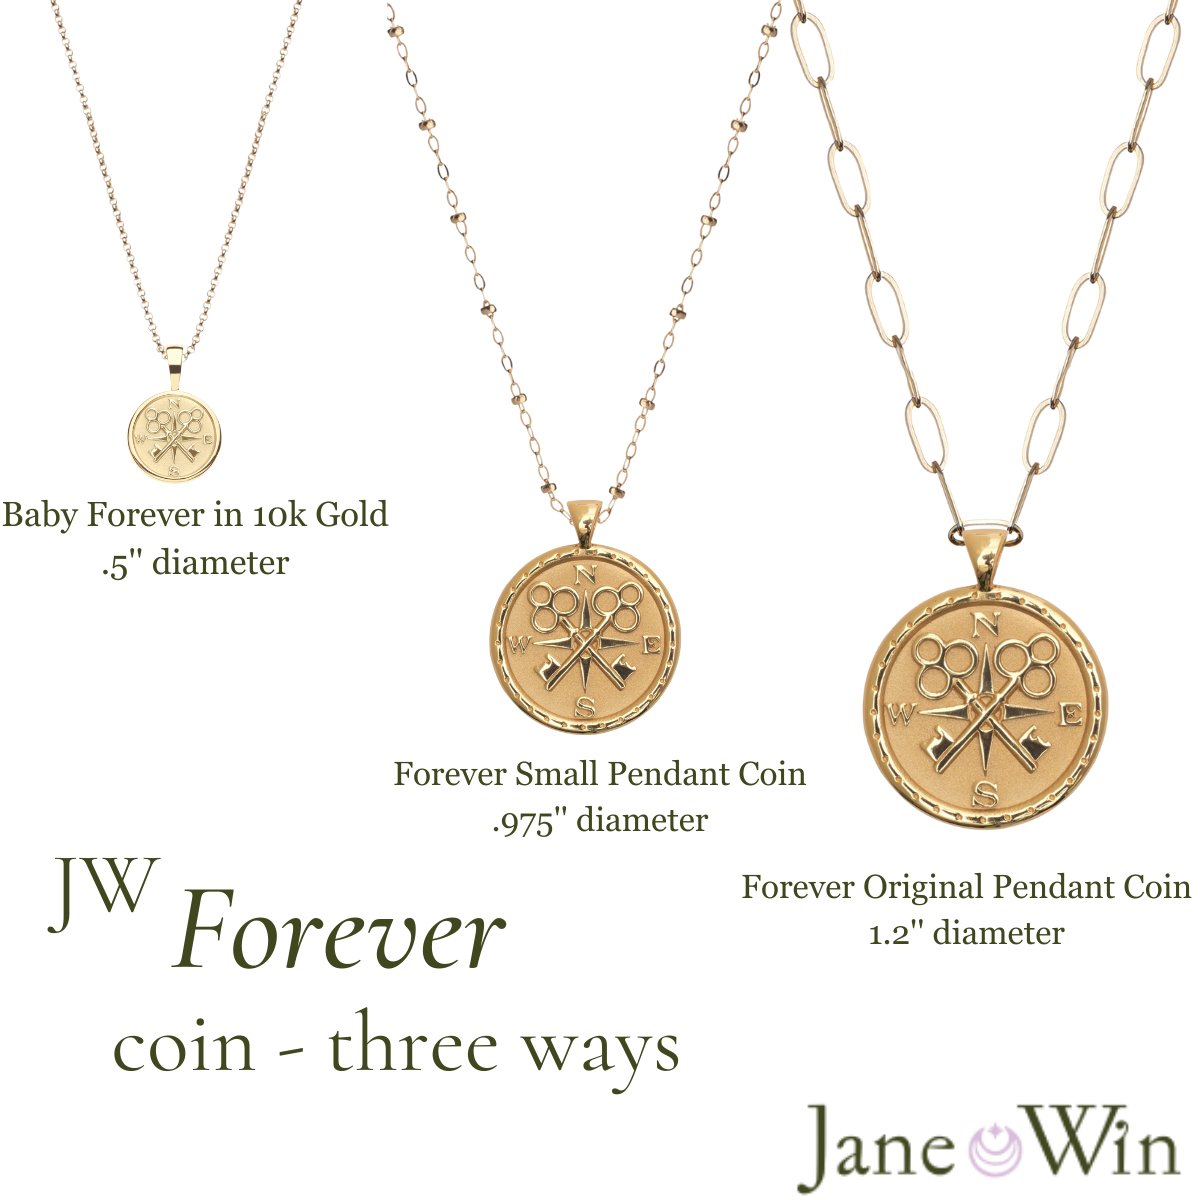 Baby FOREVER JW Pendant in 10k Gold